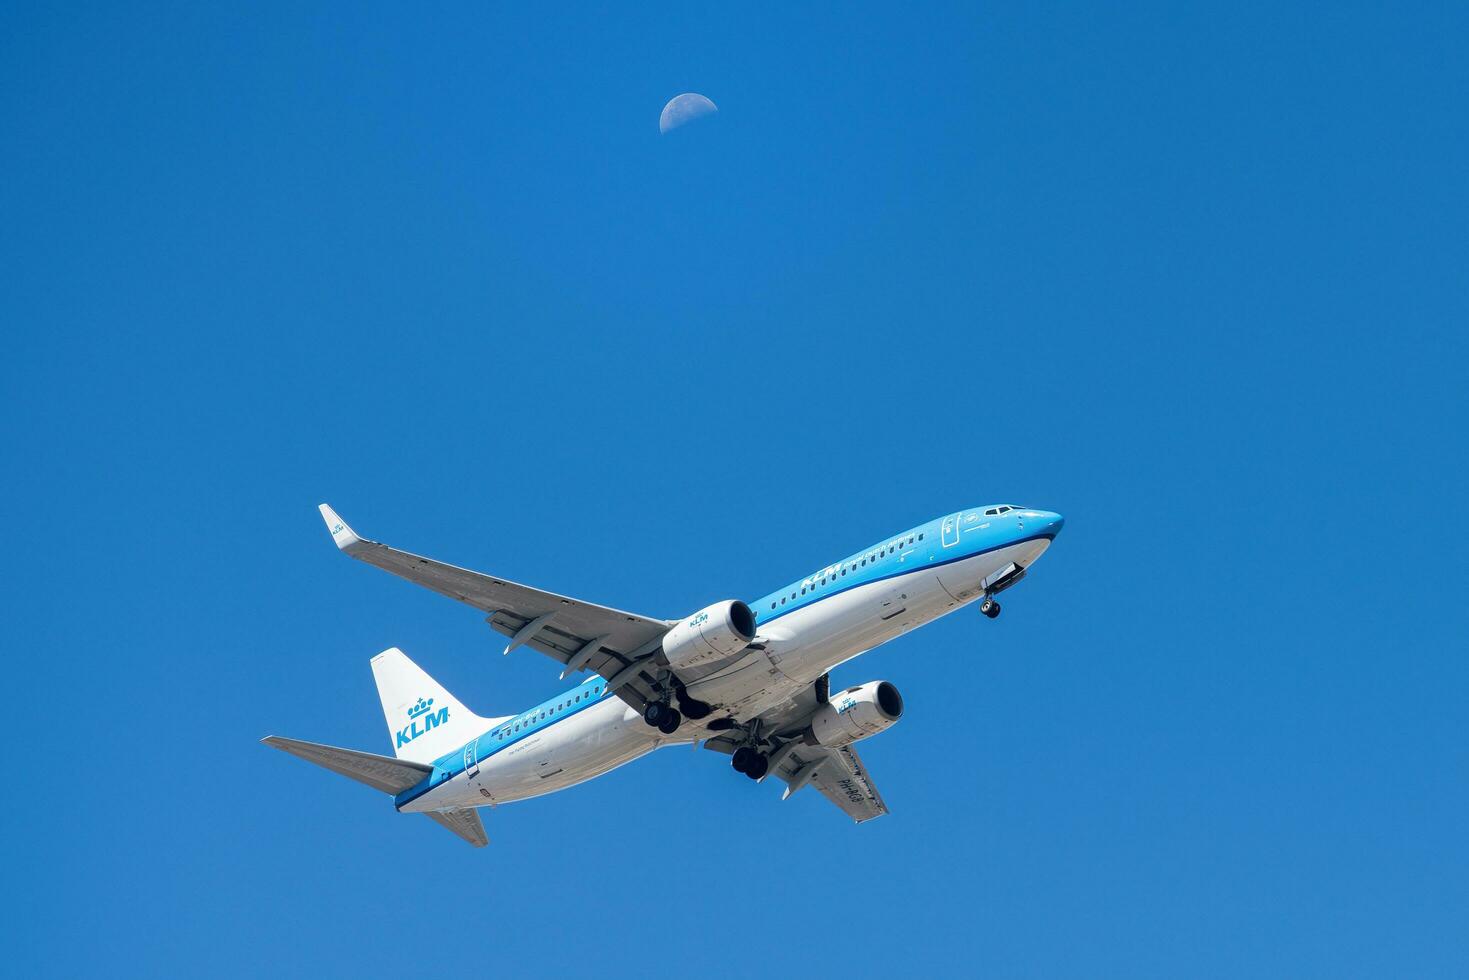 Dutch company KLM with aircraft Boeing 737-8K2 approaching to land at Lisbon International Airport against blue sky photo